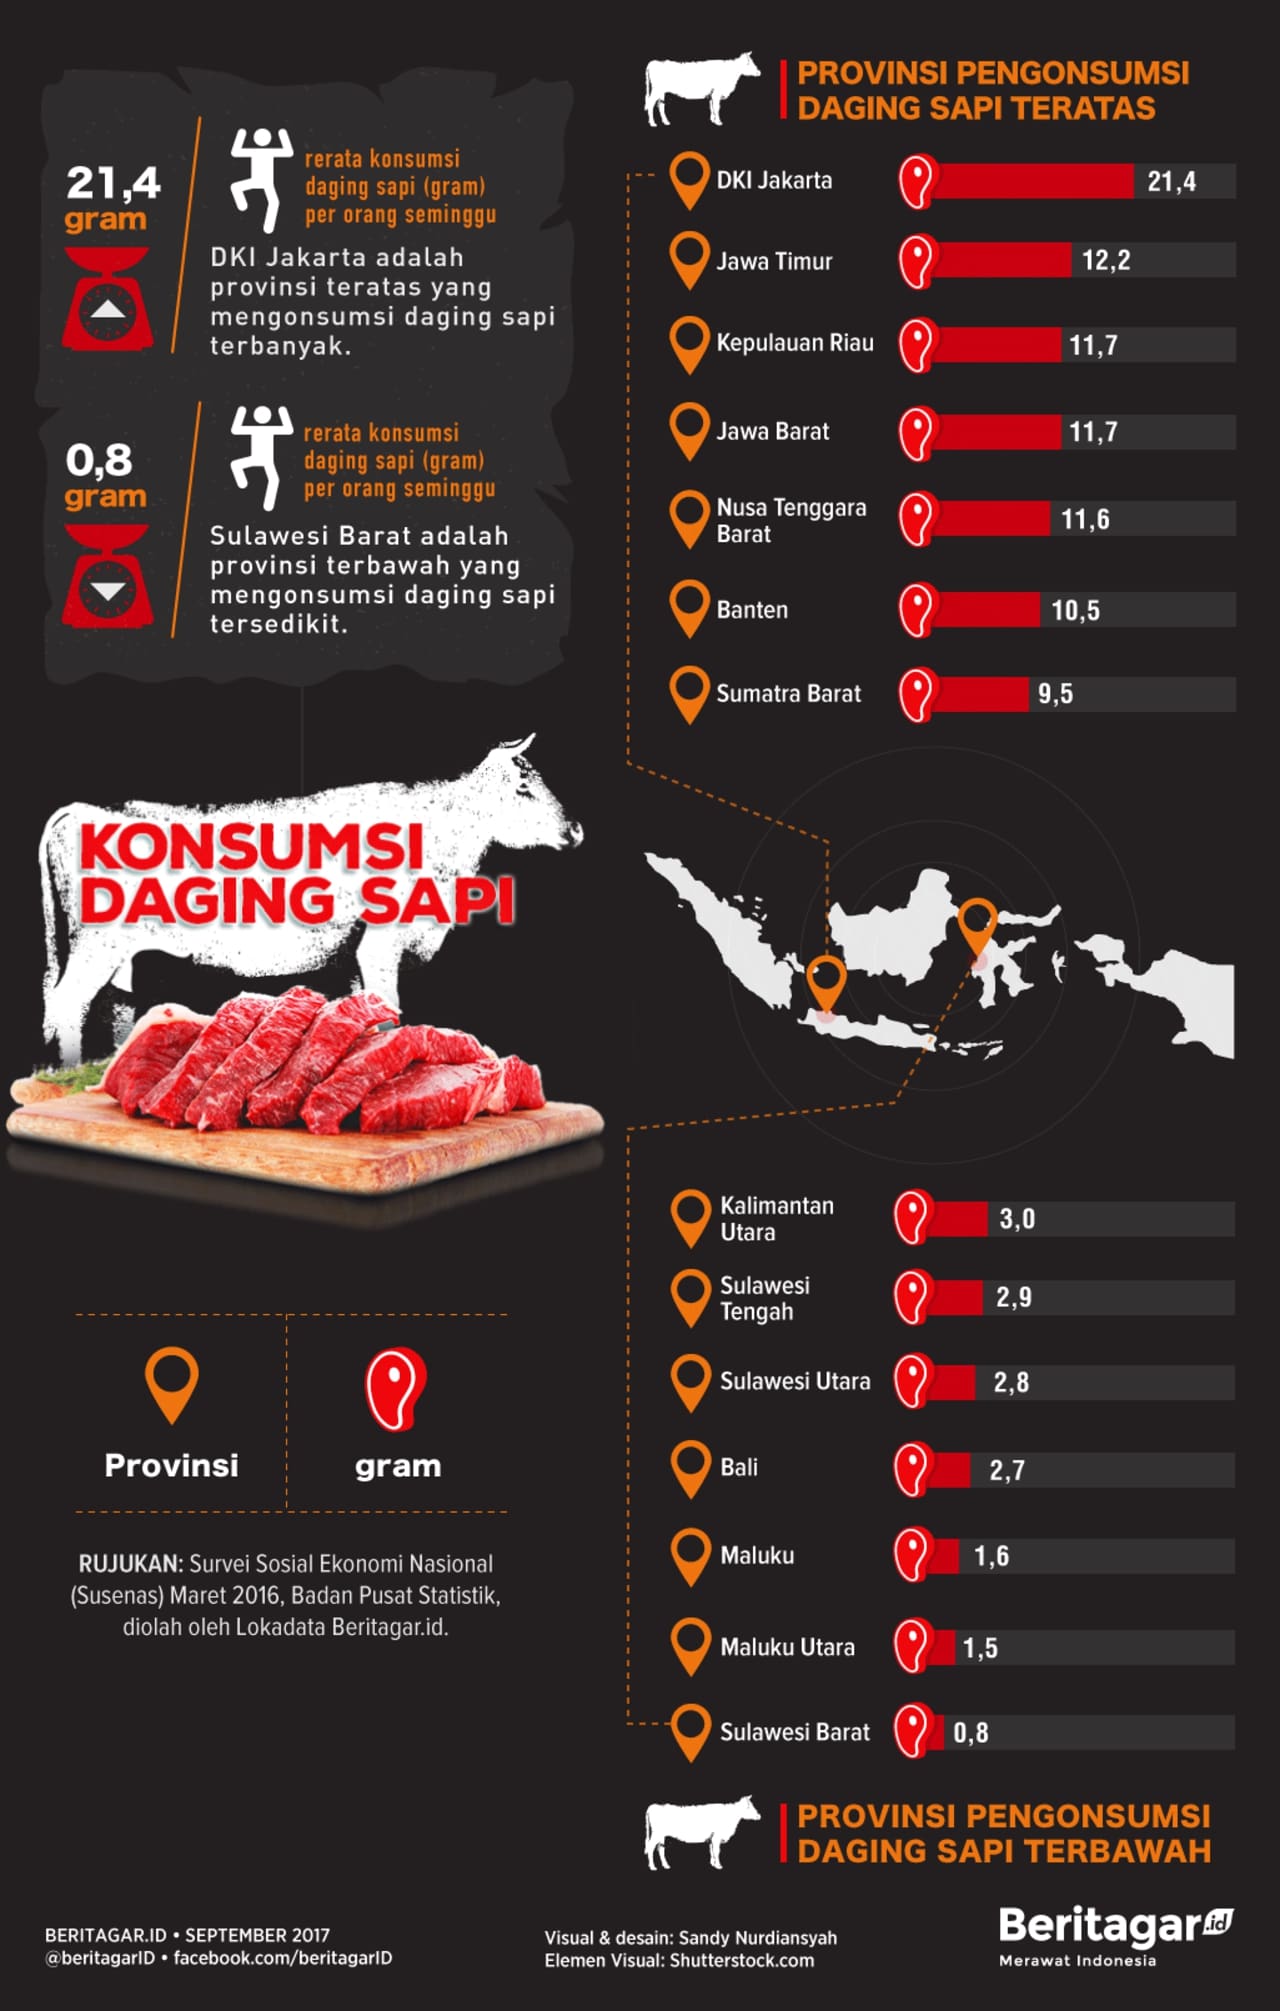 Beef Consumption in Indonesia - 2017 images